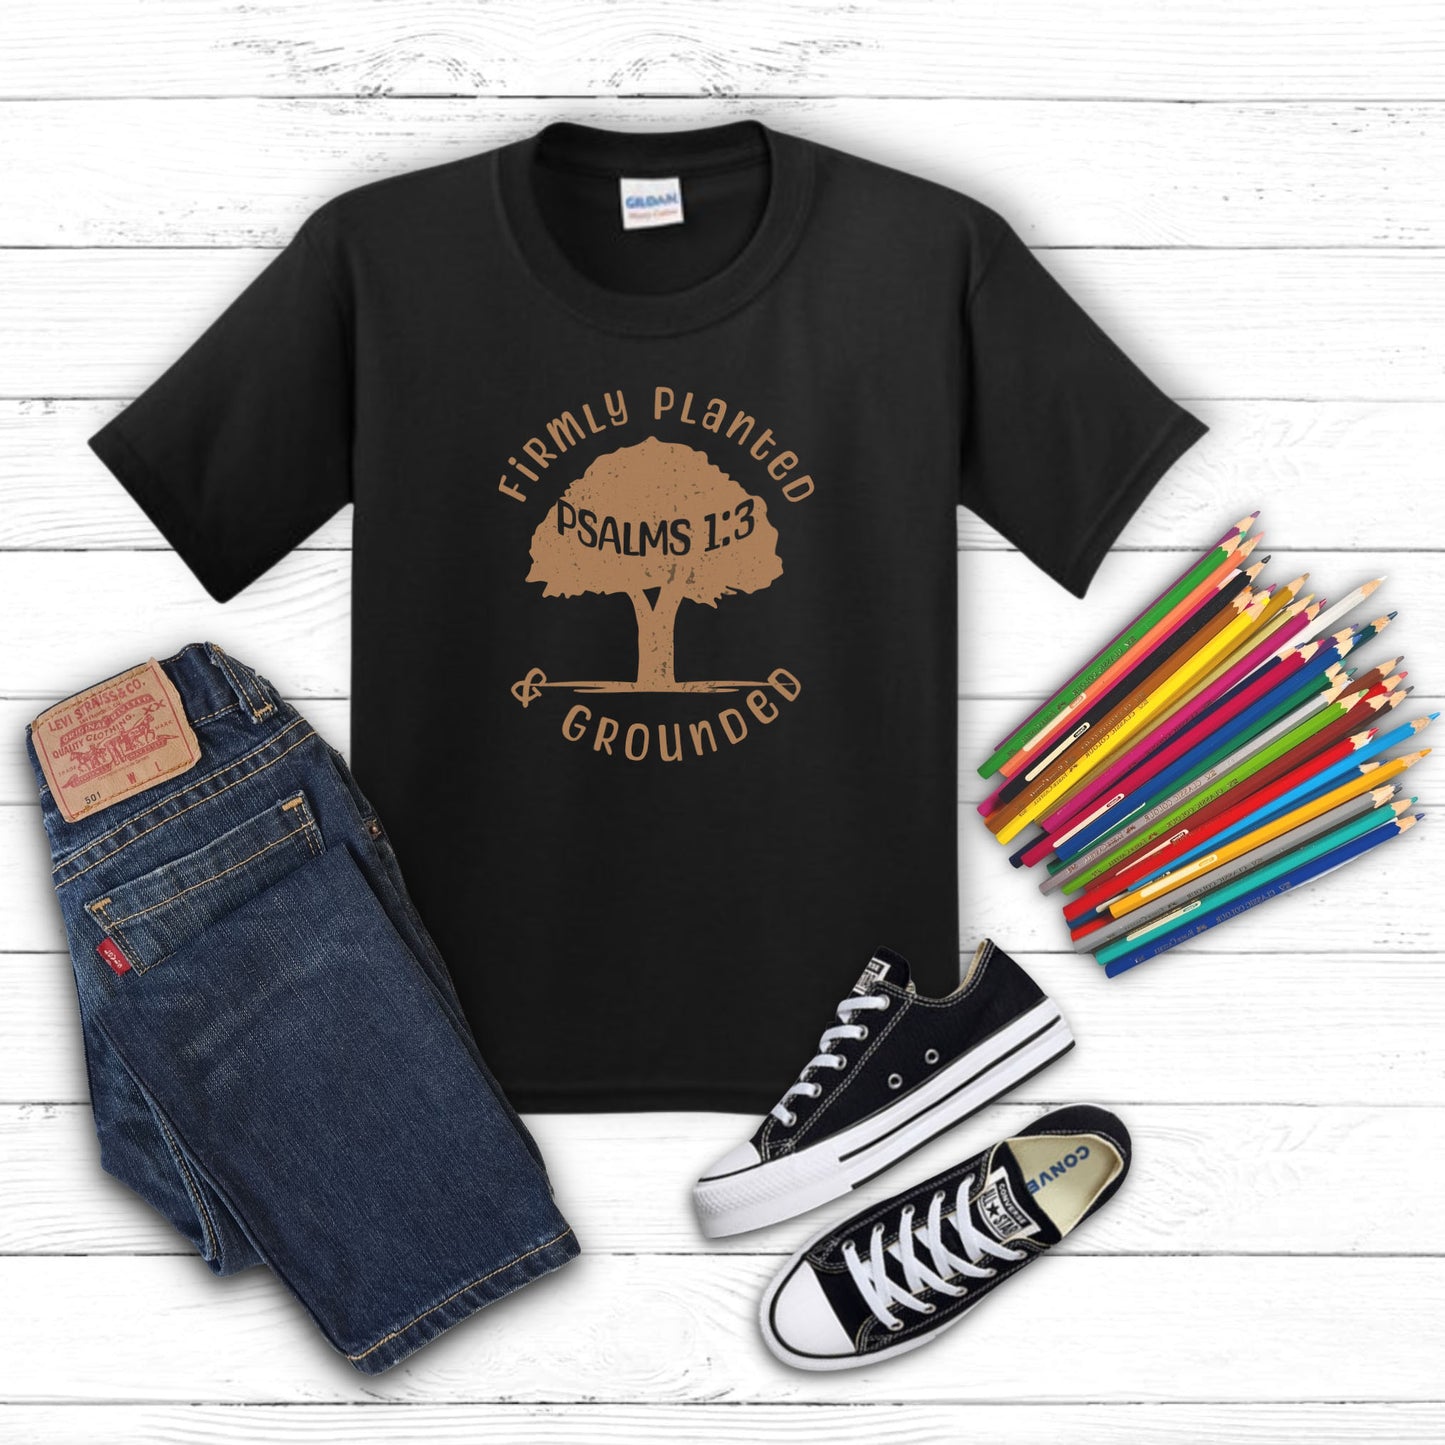 Firmly Planted kids t-shirt in Black